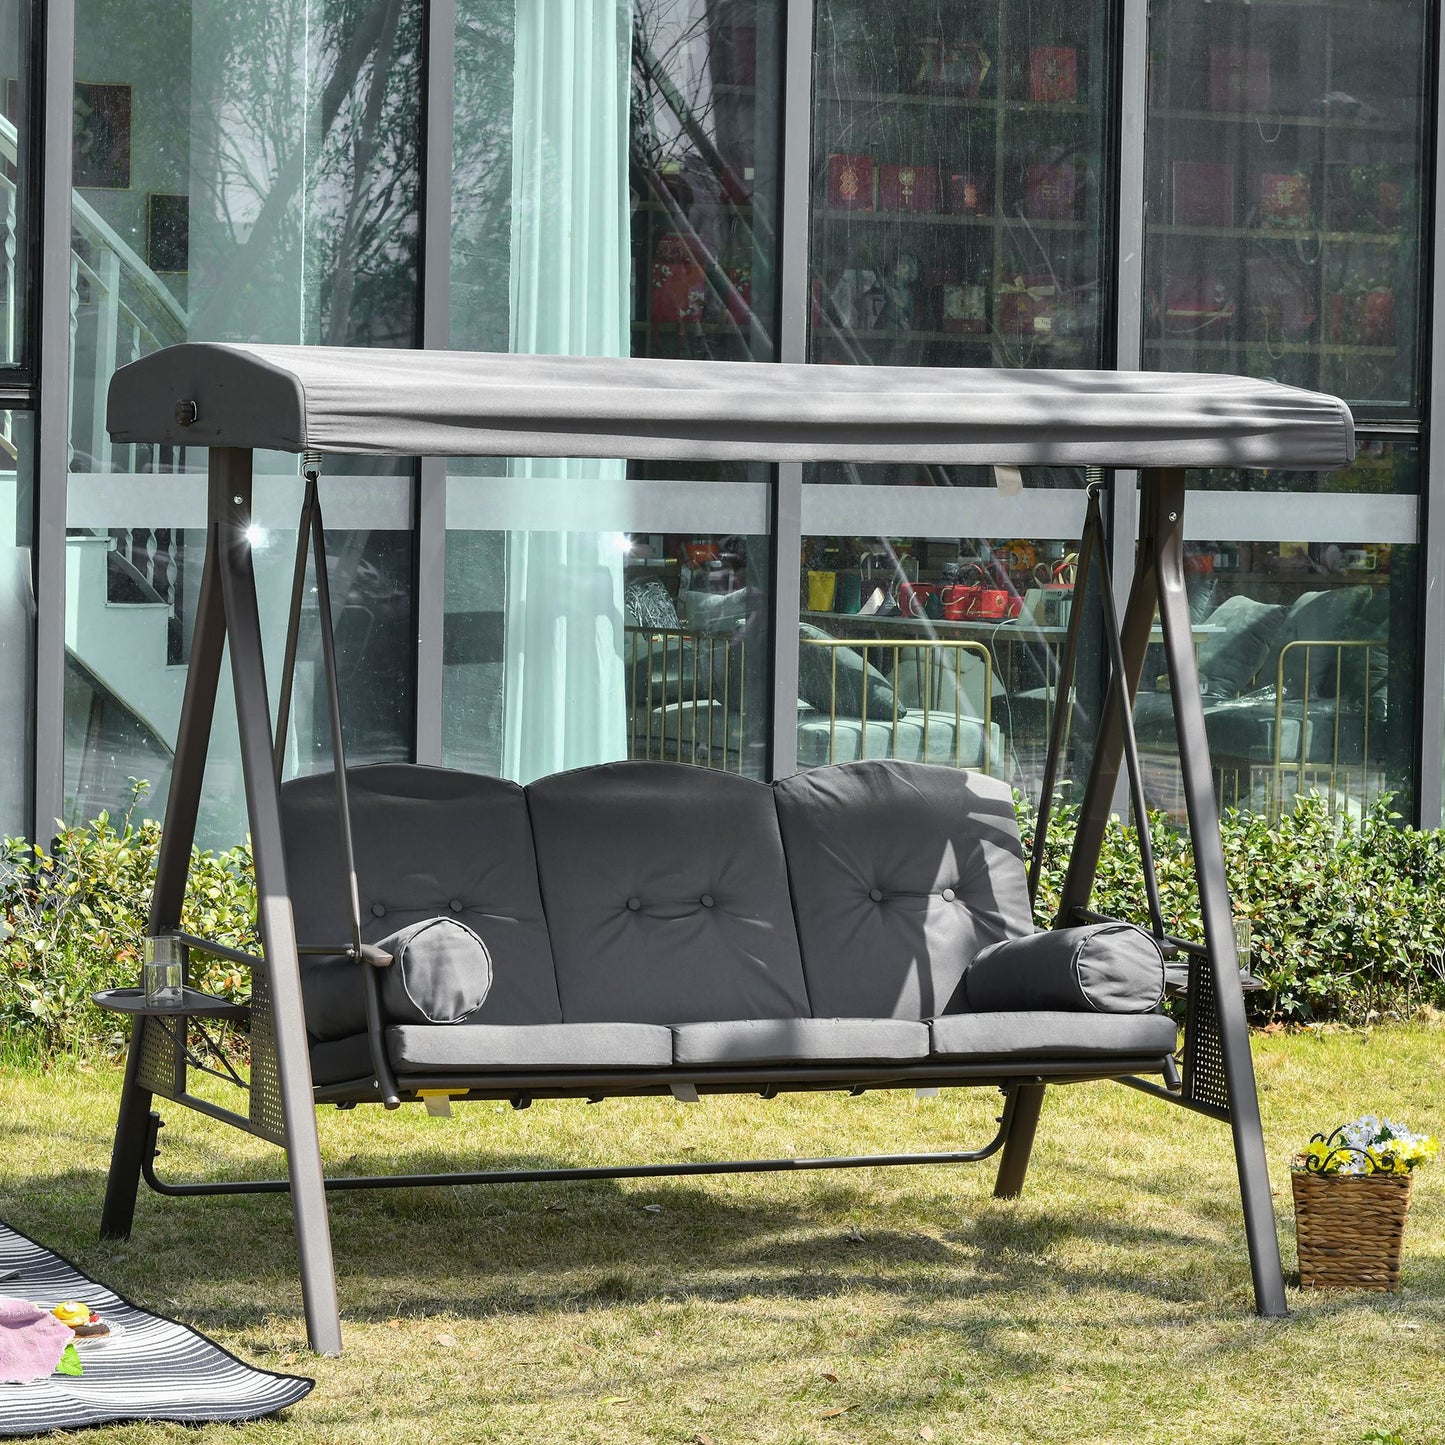 Outsunny 3 Seat Garden Swing Chair Steel Swing Bench w/ Cushions Cup Trays